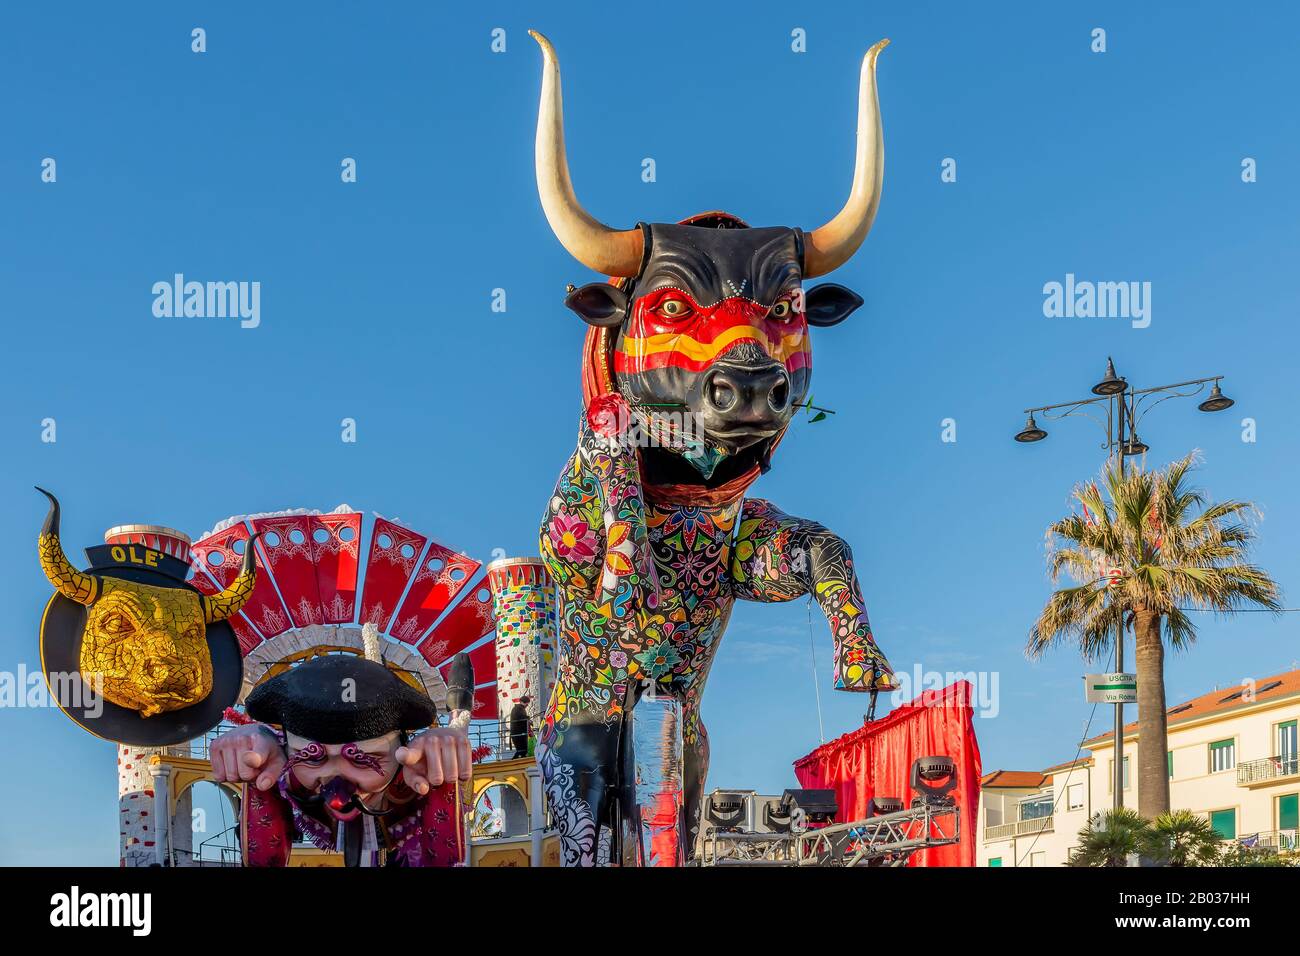 The allegorical float called "Ole' " parades during the Carnival of  Viareggio, Italy Stock Photo - Alamy